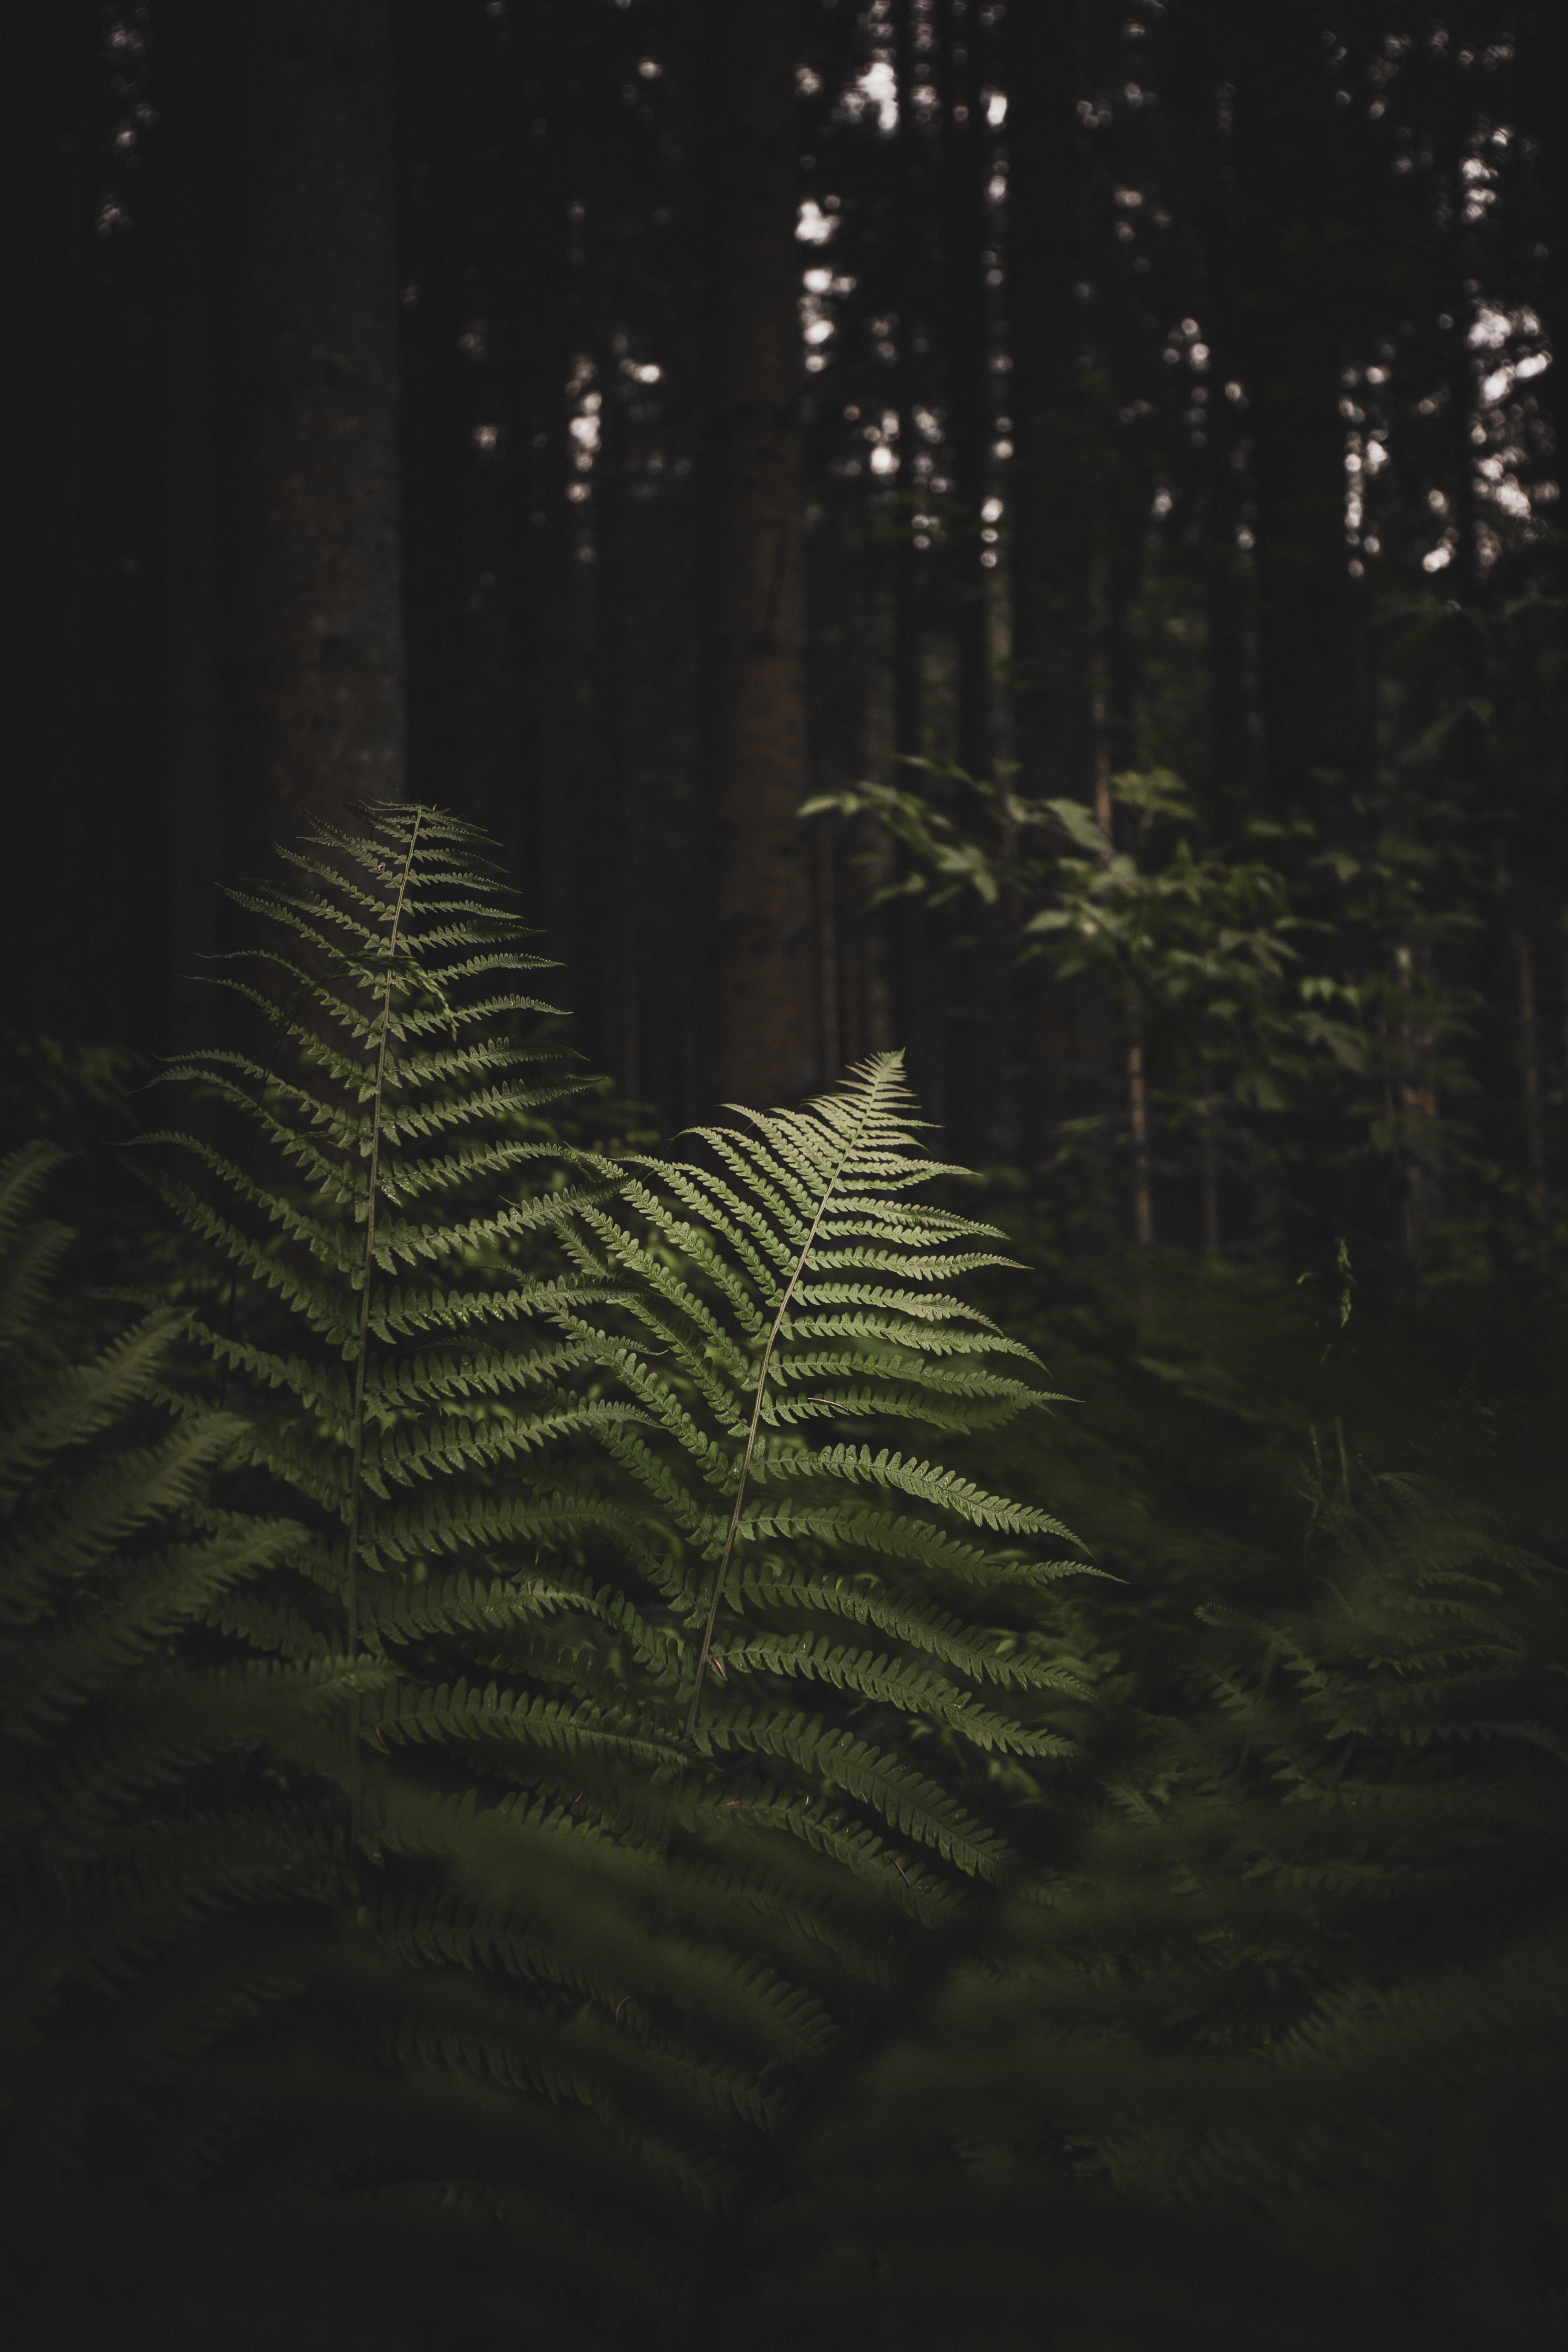 fern, nature, trees, forest, branches Full HD